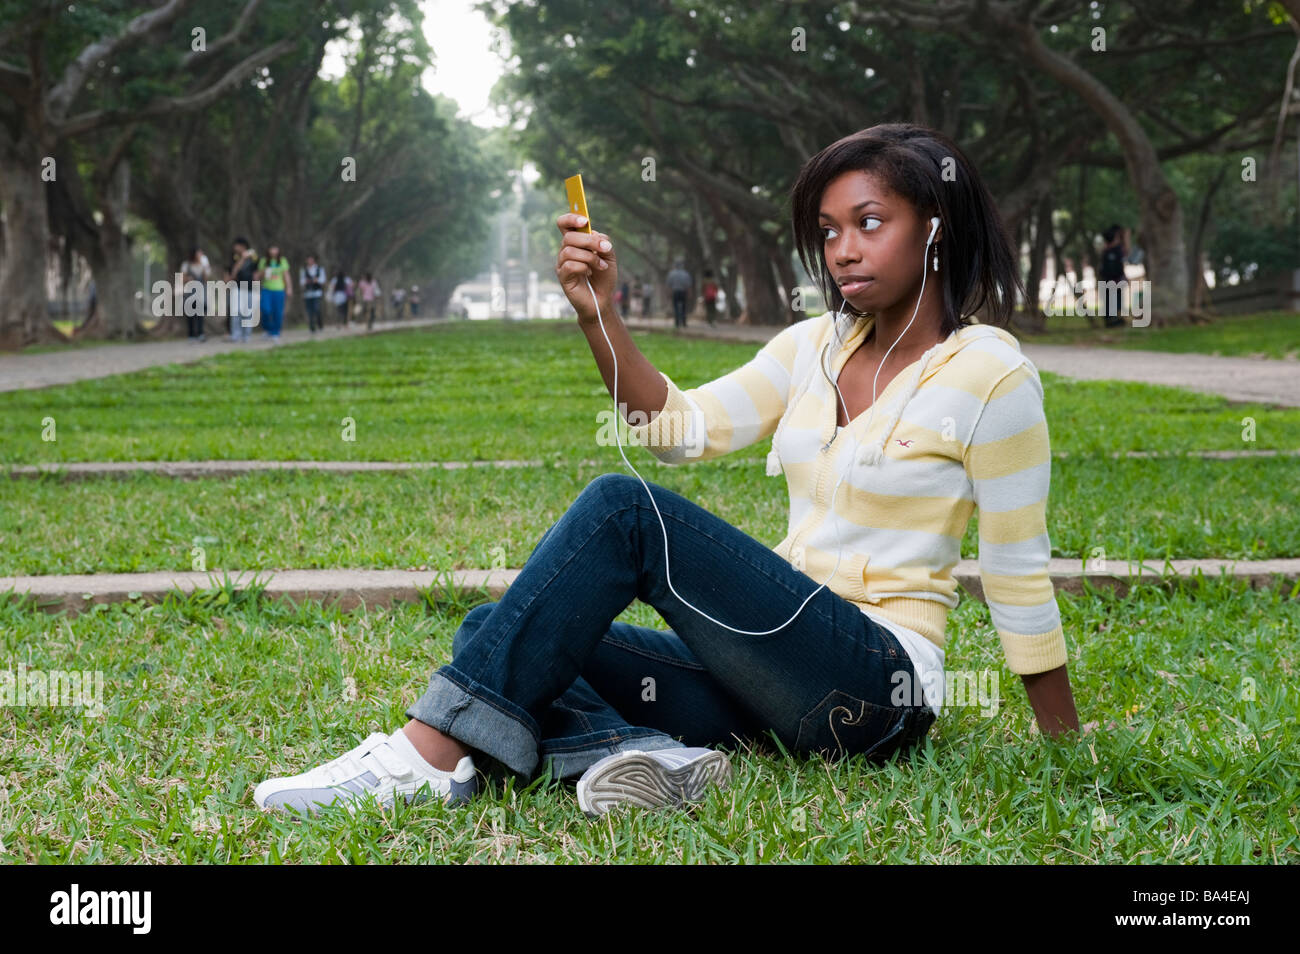 Young Woman Sitting In Park Listening To Music On Mp3 Player Stock Photo